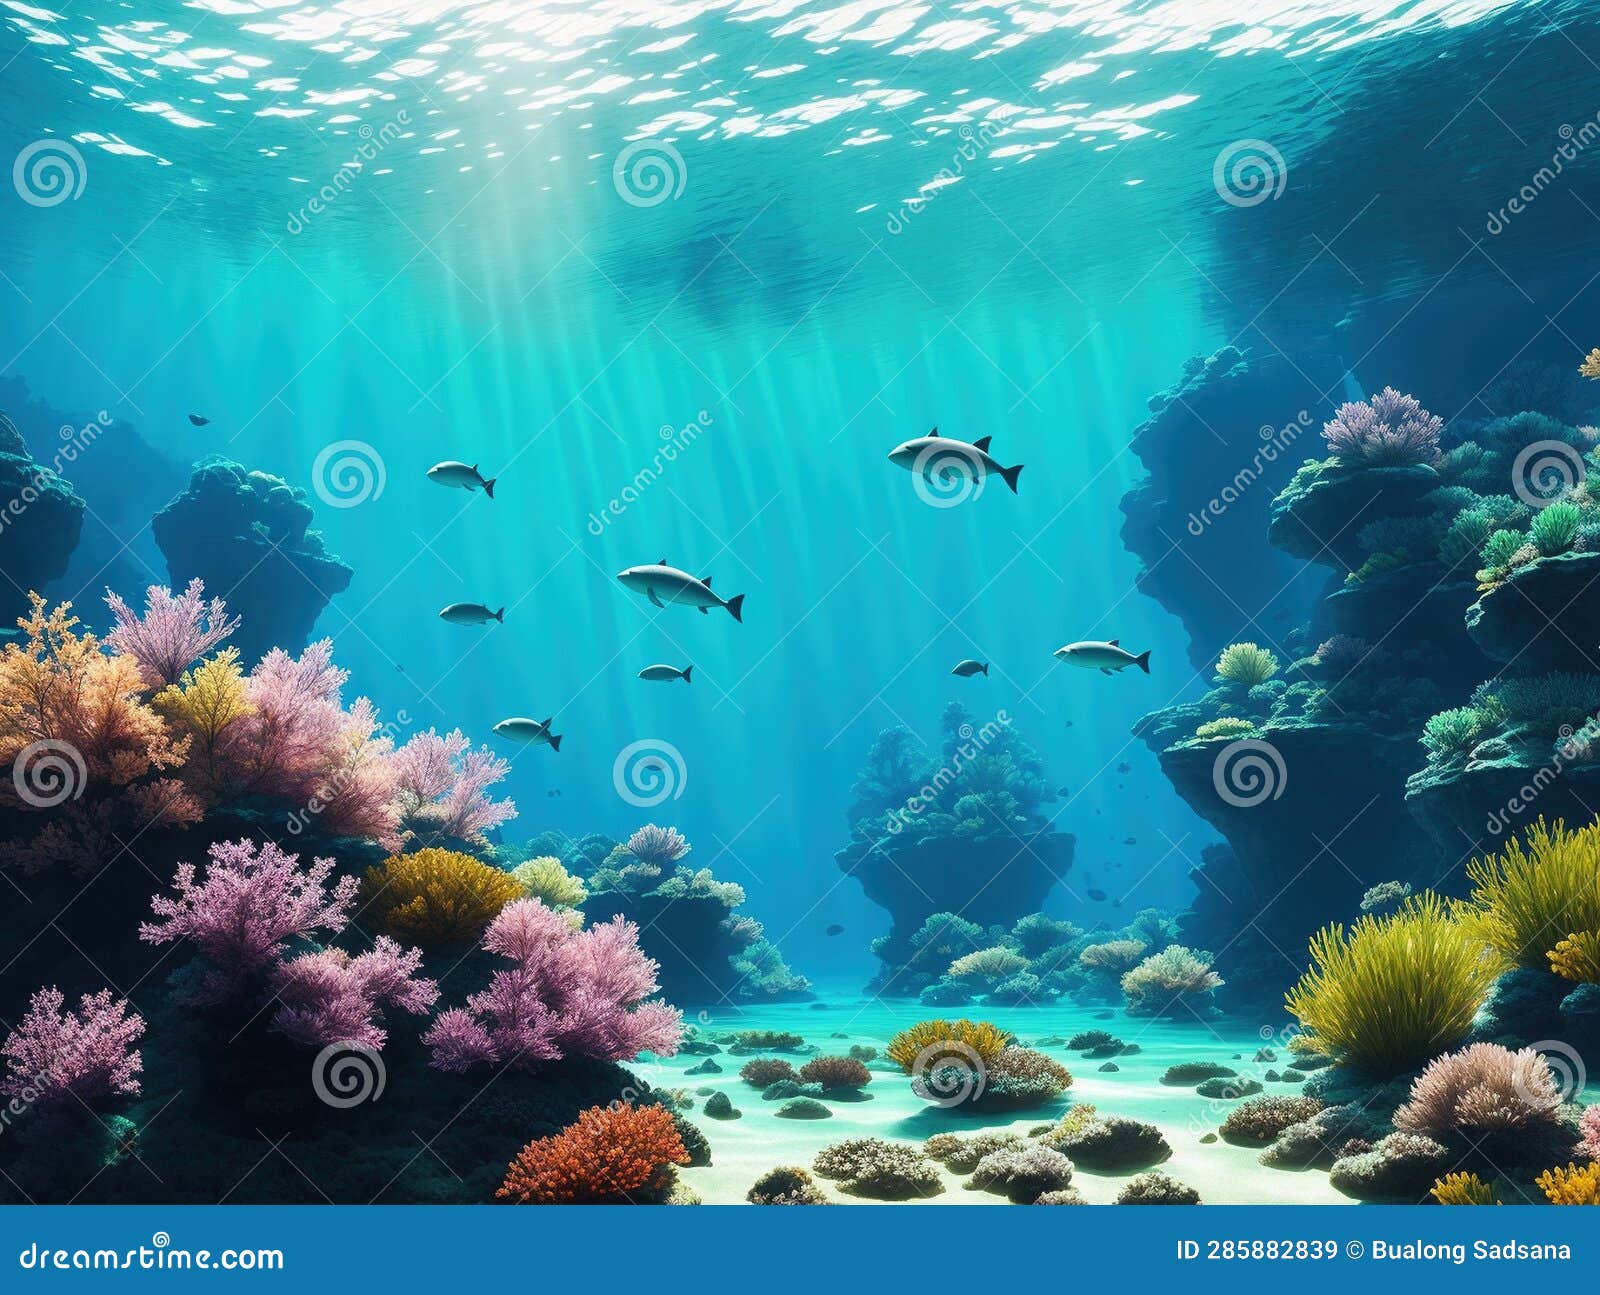 National Monuments Capture the Beauty of the Underwater World Made with ...